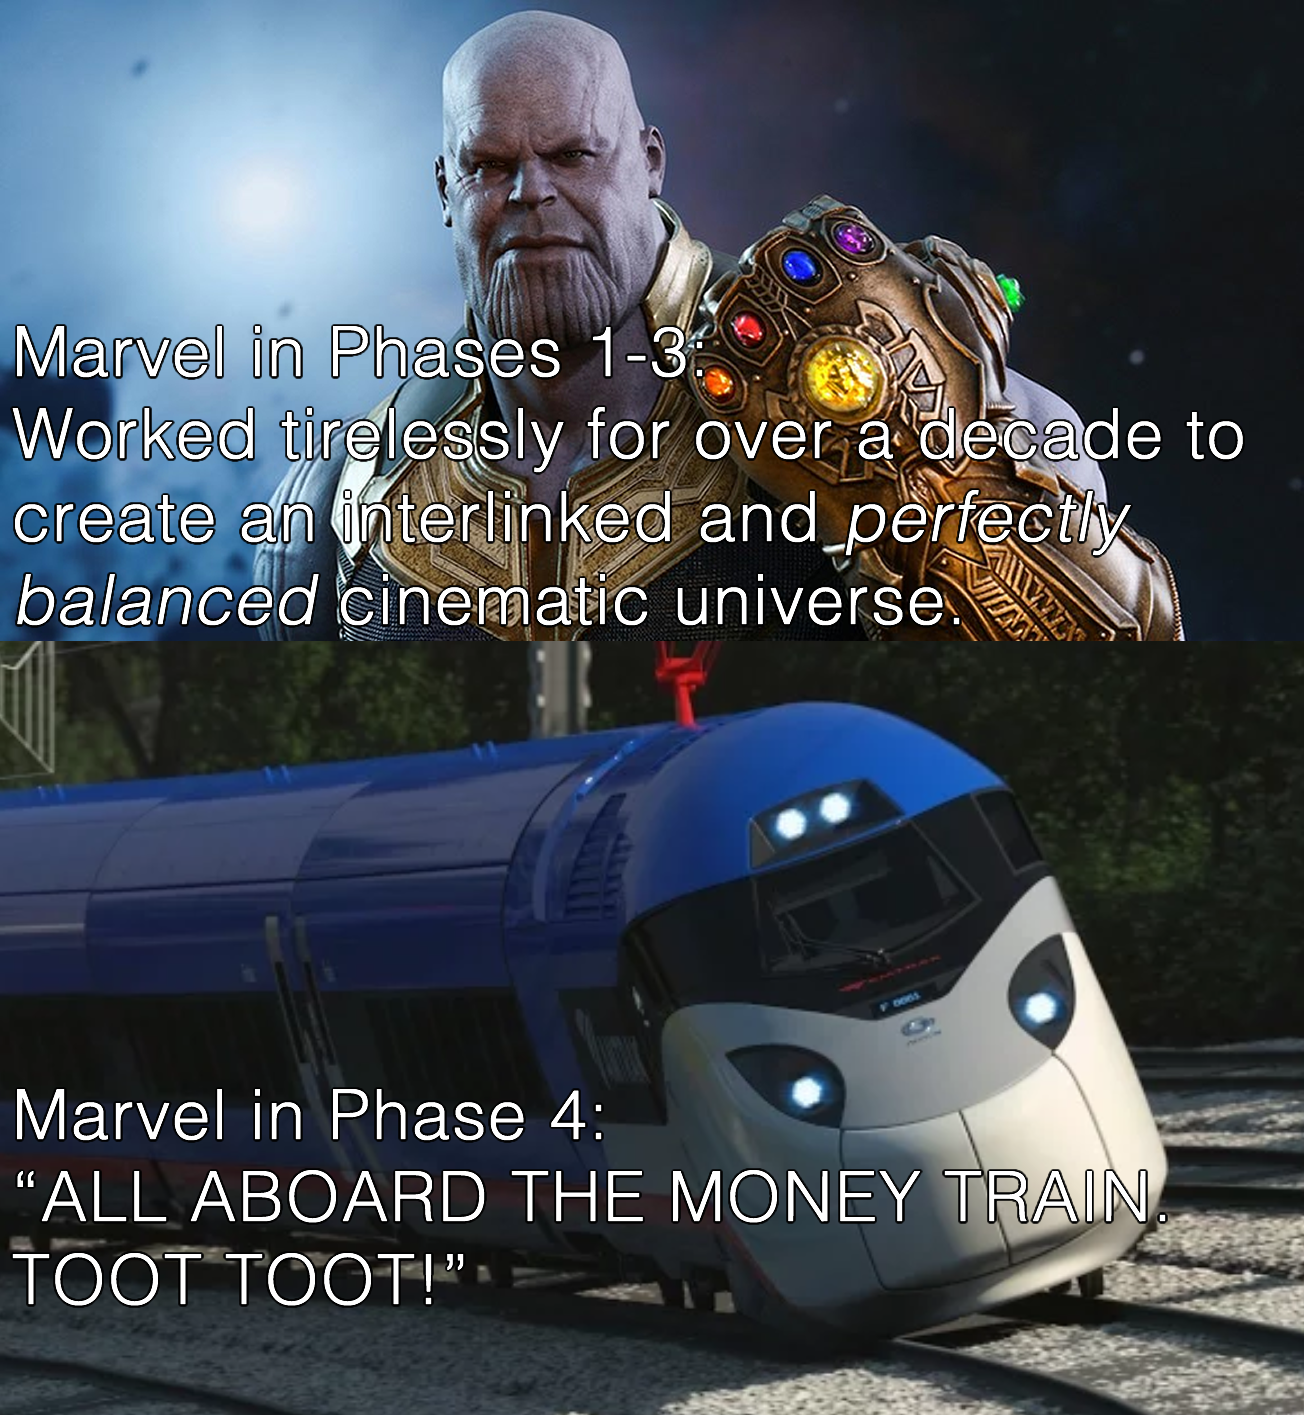 photo caption - Marvel in Phases 13 Worked tirelessly for over a decade to create an interlinked and perfectly balanced cinematic universe, Marvel in Phase 4 "All Aboard The Money Train Toot Toot!"